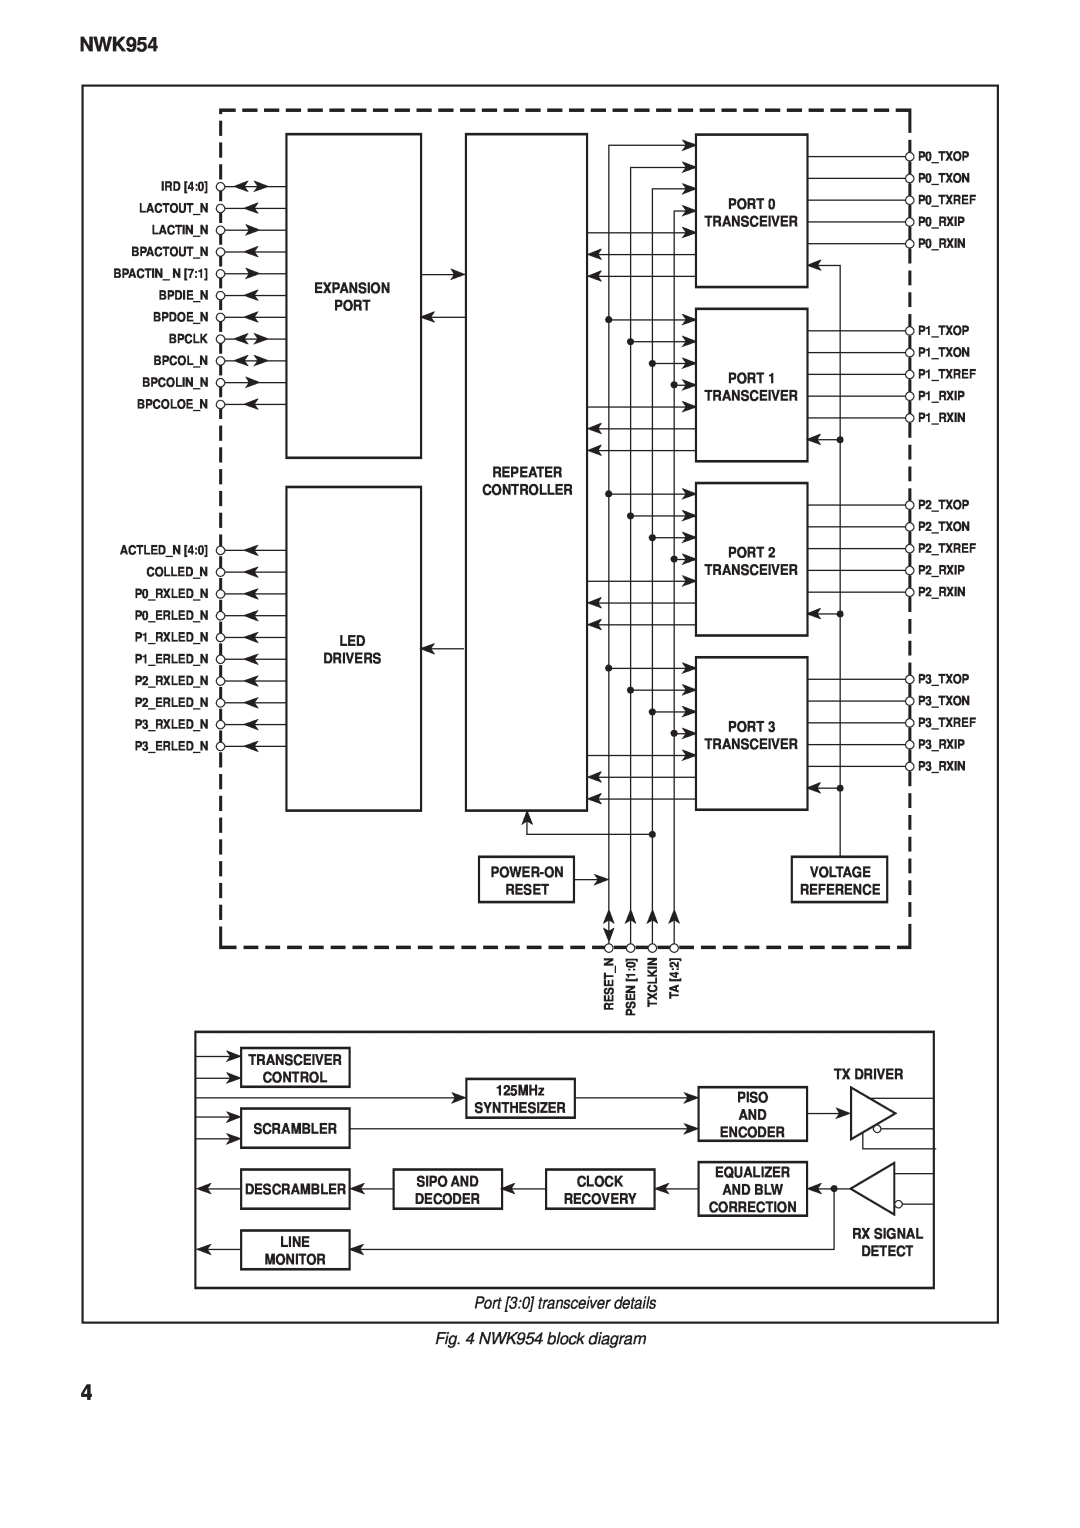 Mitel NWK954 block diagram, Voltage, Reference, Tx Driver, 125MHz, Synthesizer, Sipo And, Decoder, Rx Signal, Detect 